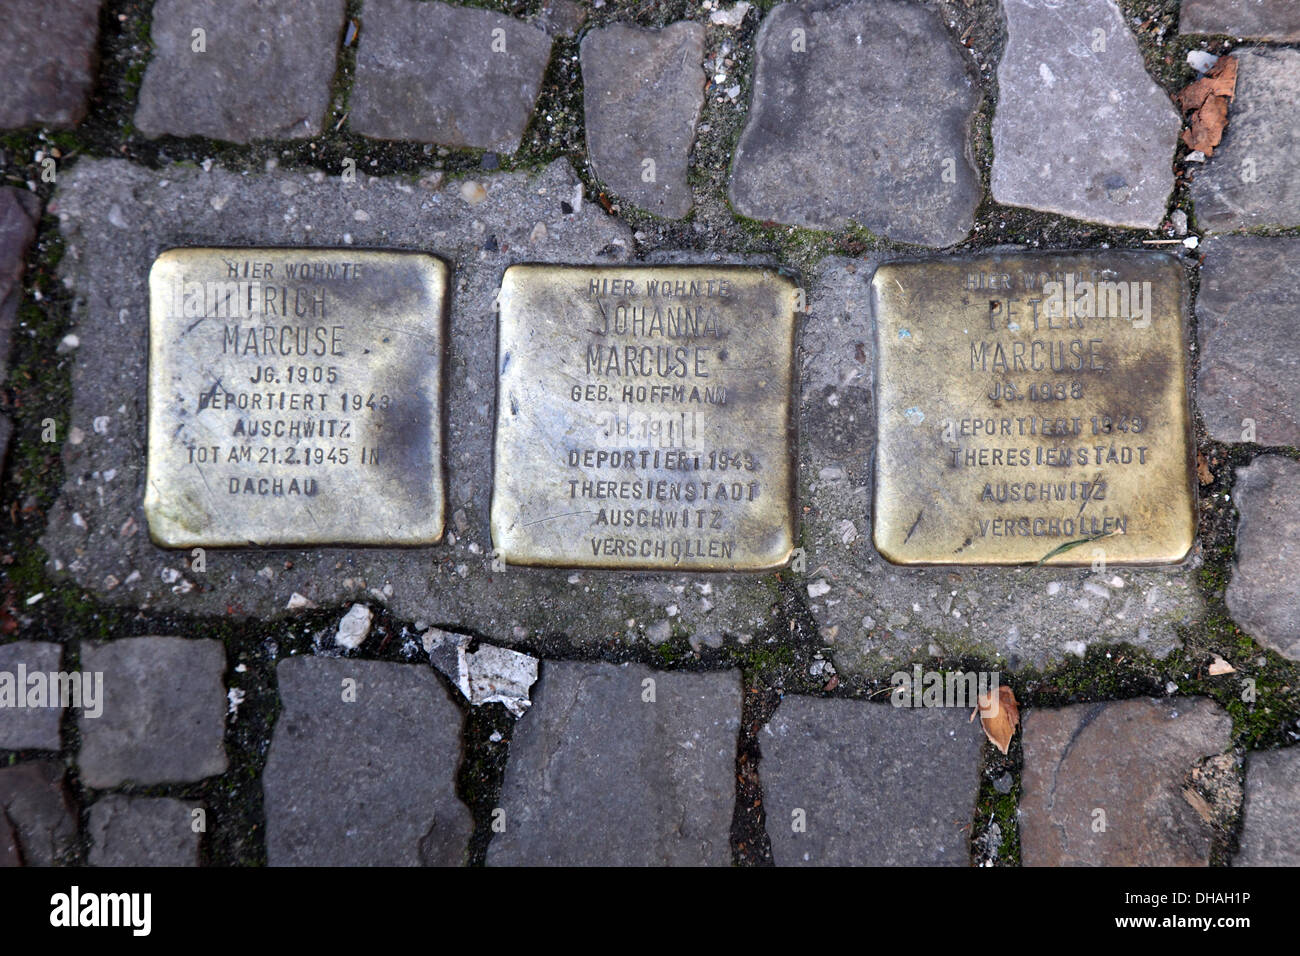 Three of many brass memorials set in the pavement in Hackescher to Jewish Holocaust victims, Berlin Stock Photo